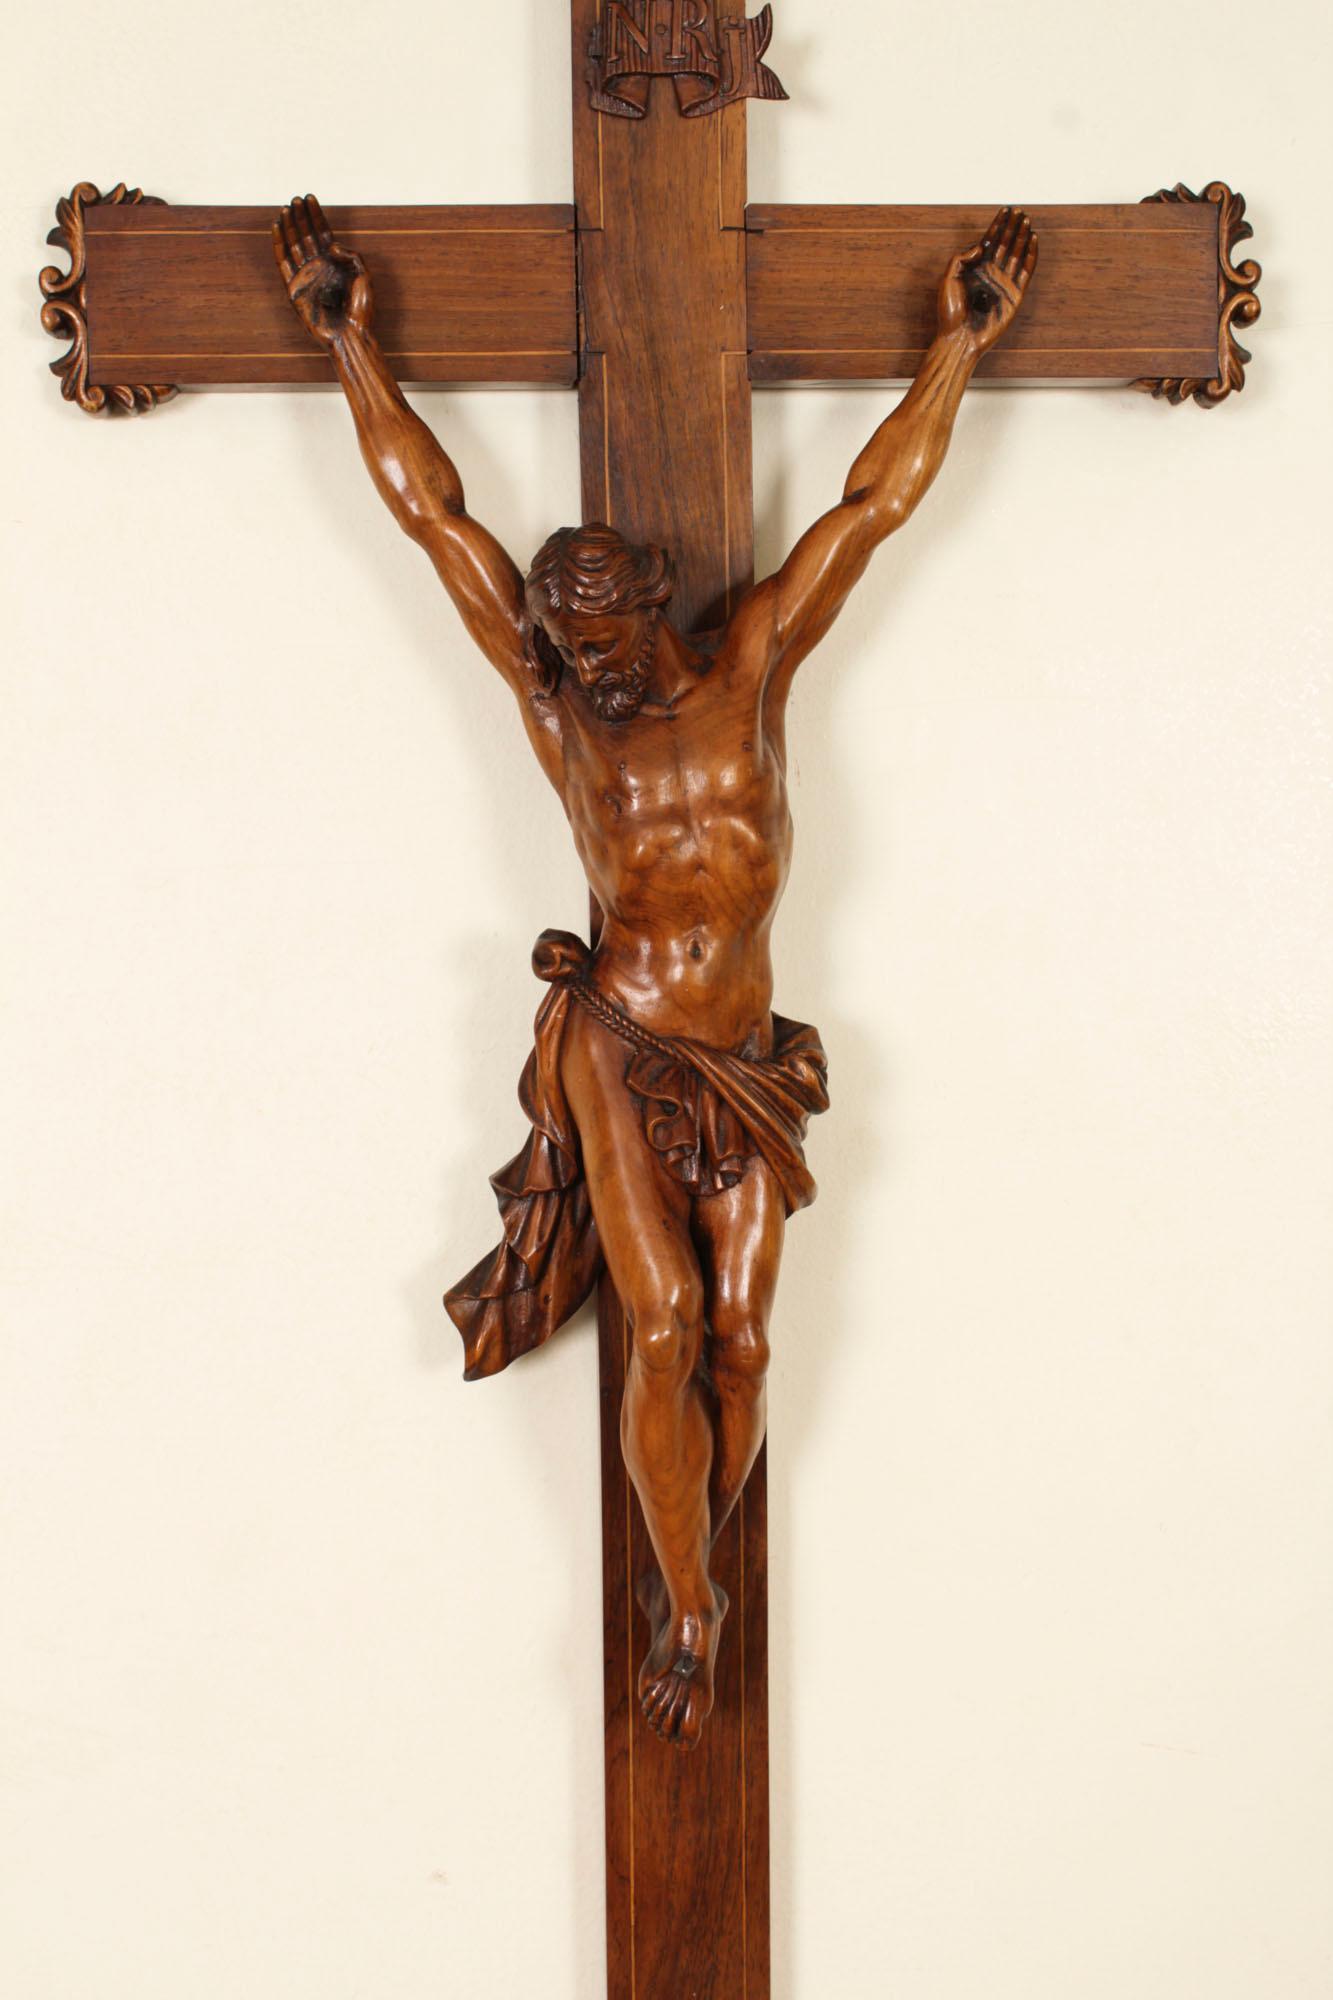 This is a large fine antique French patinated walnut Corpus Christi altar cross, circa 1860 in date.

The details  are very impressive, the Corpus Christi is very finely carved and life-like, wearing a flowing linen cloth, his eyes closed and head